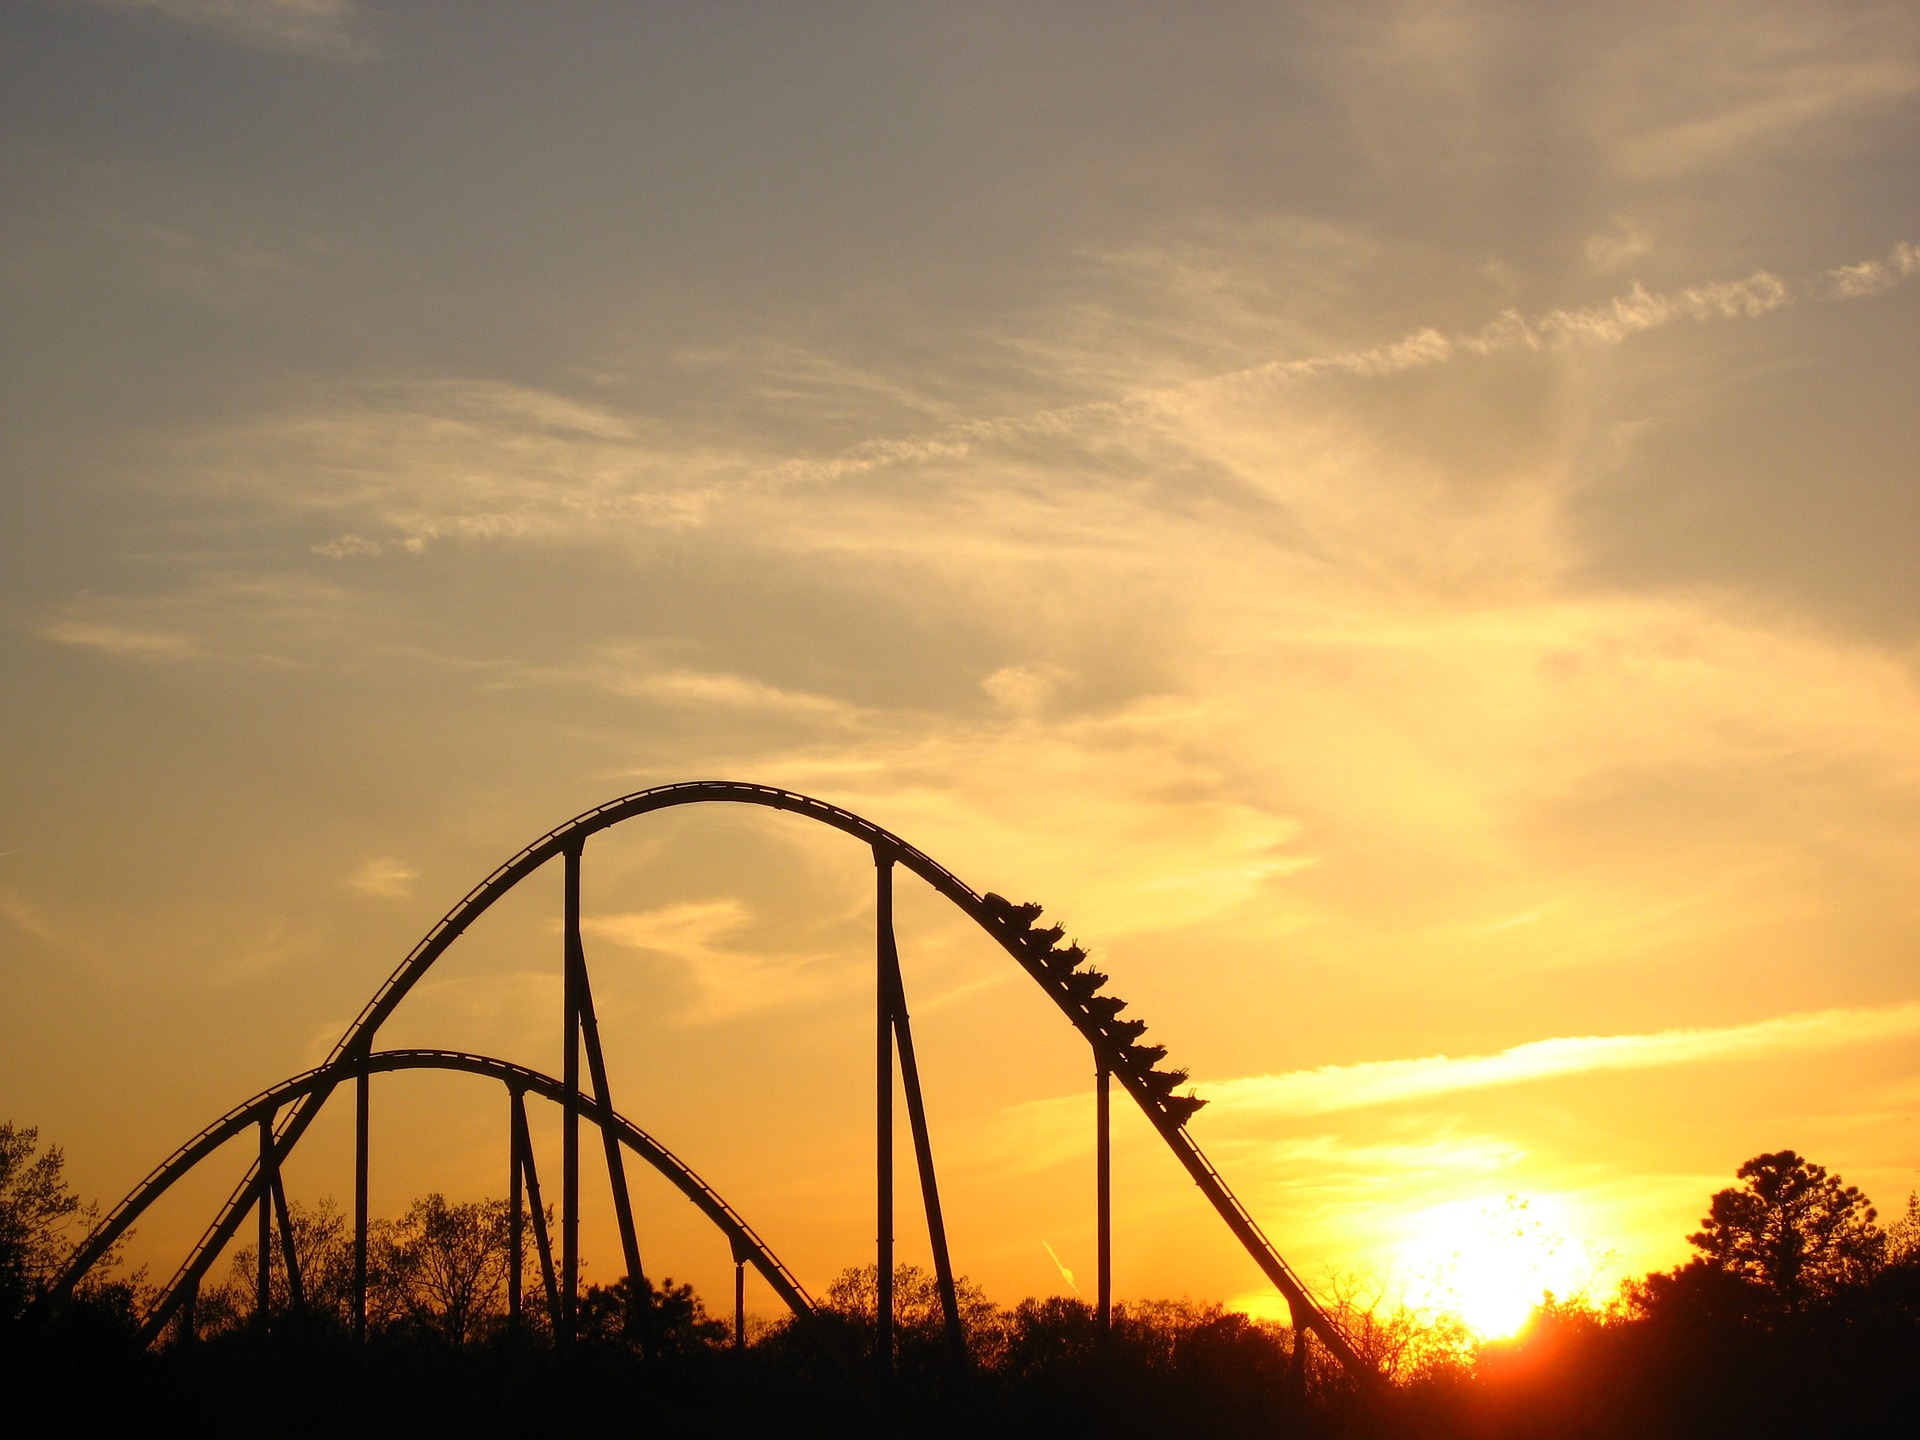 10 quick roller coaster facts to celebrate national roller coaster day -  ABC7 Chicago